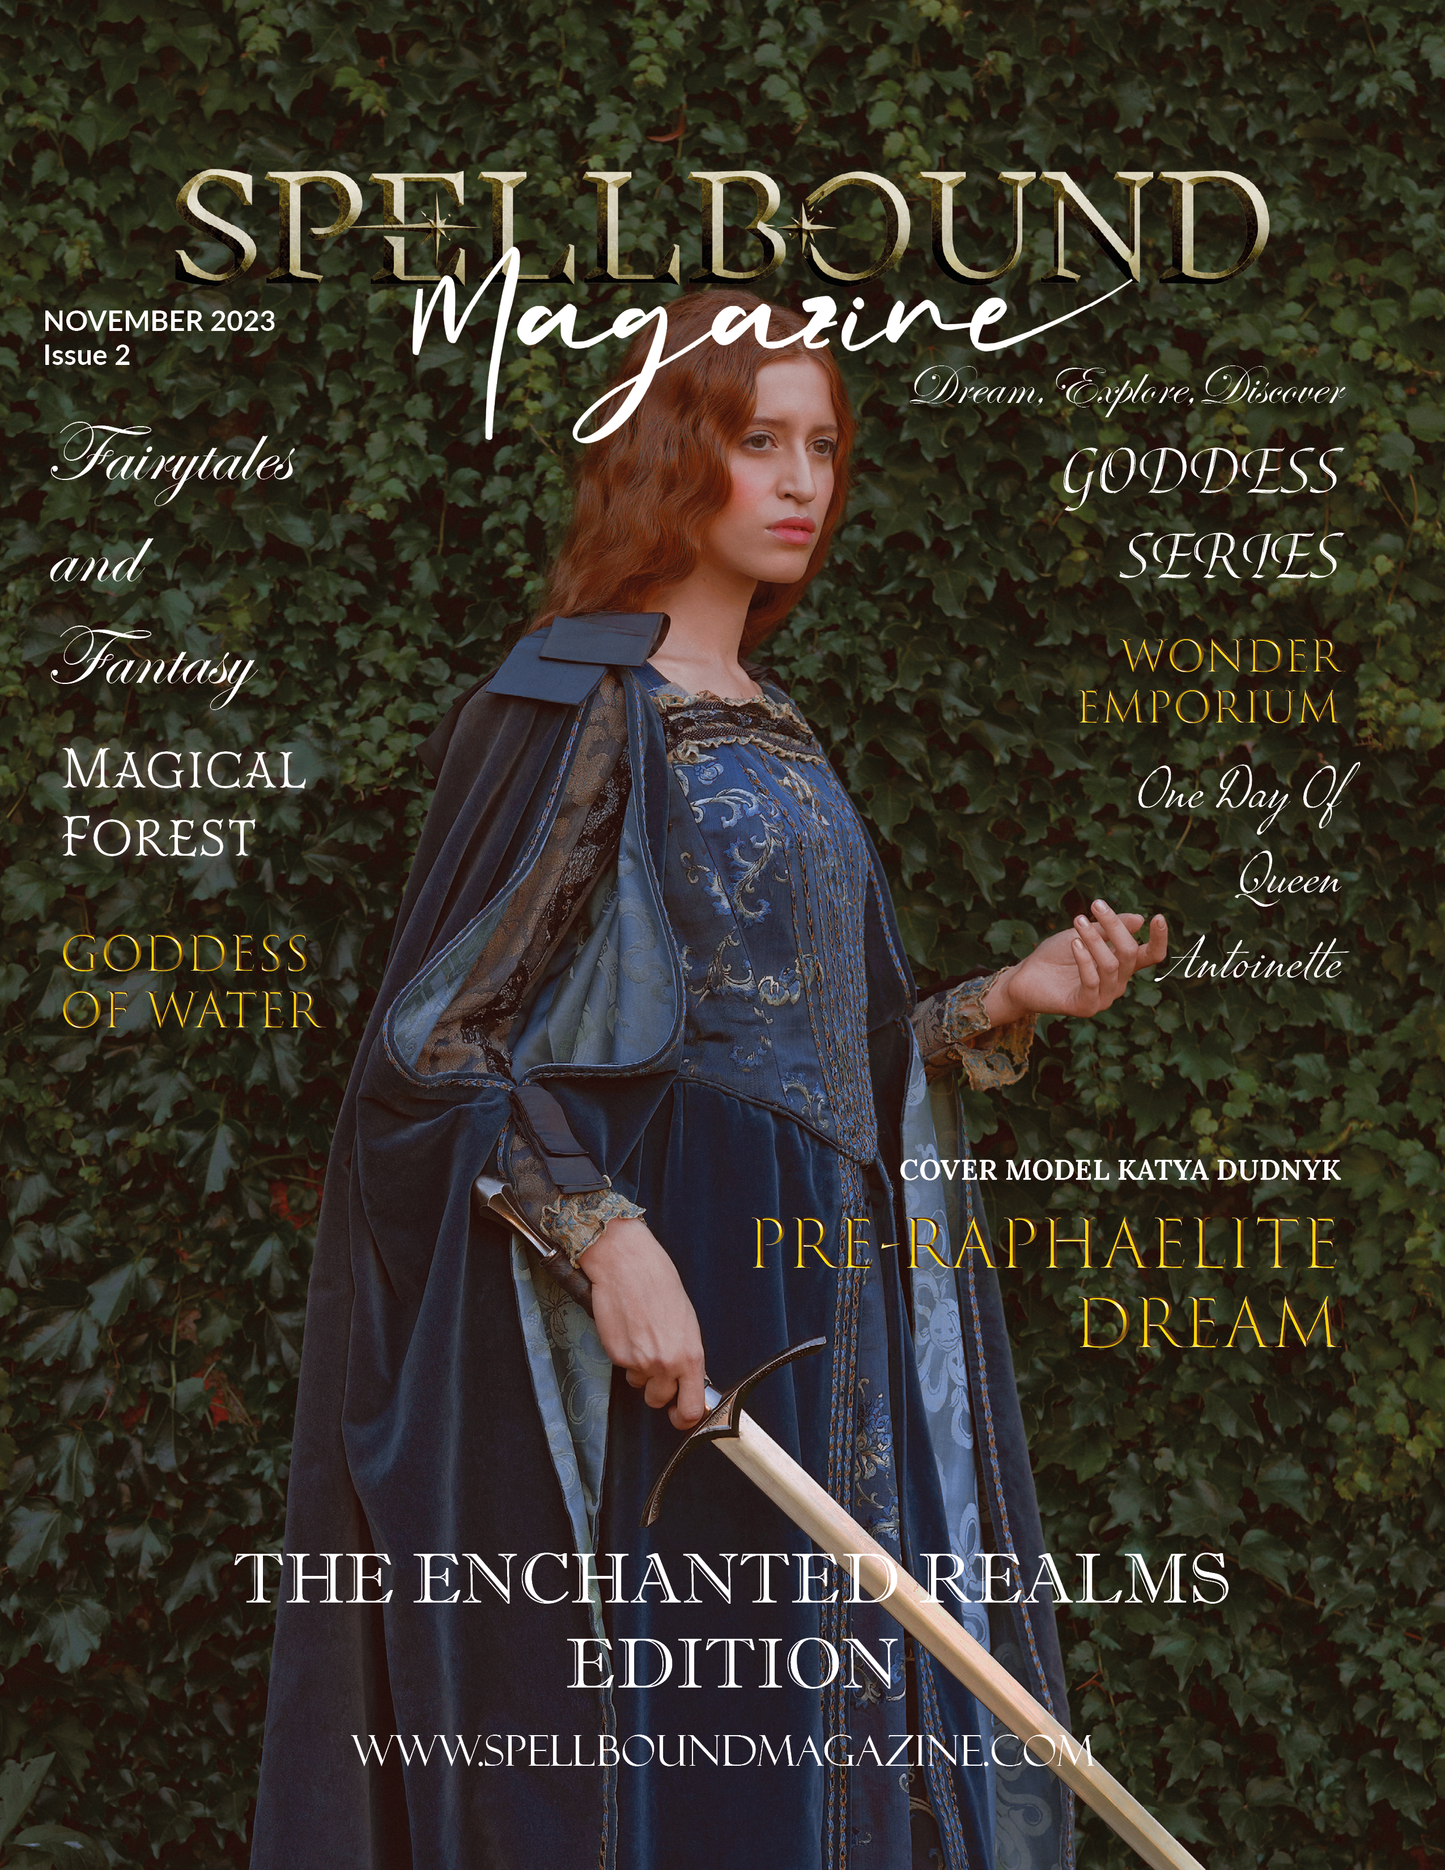 Spellbound Fairytales and Fantasy Magazine - November 2023: The Enchanted Realms Issue⁠ II⁠